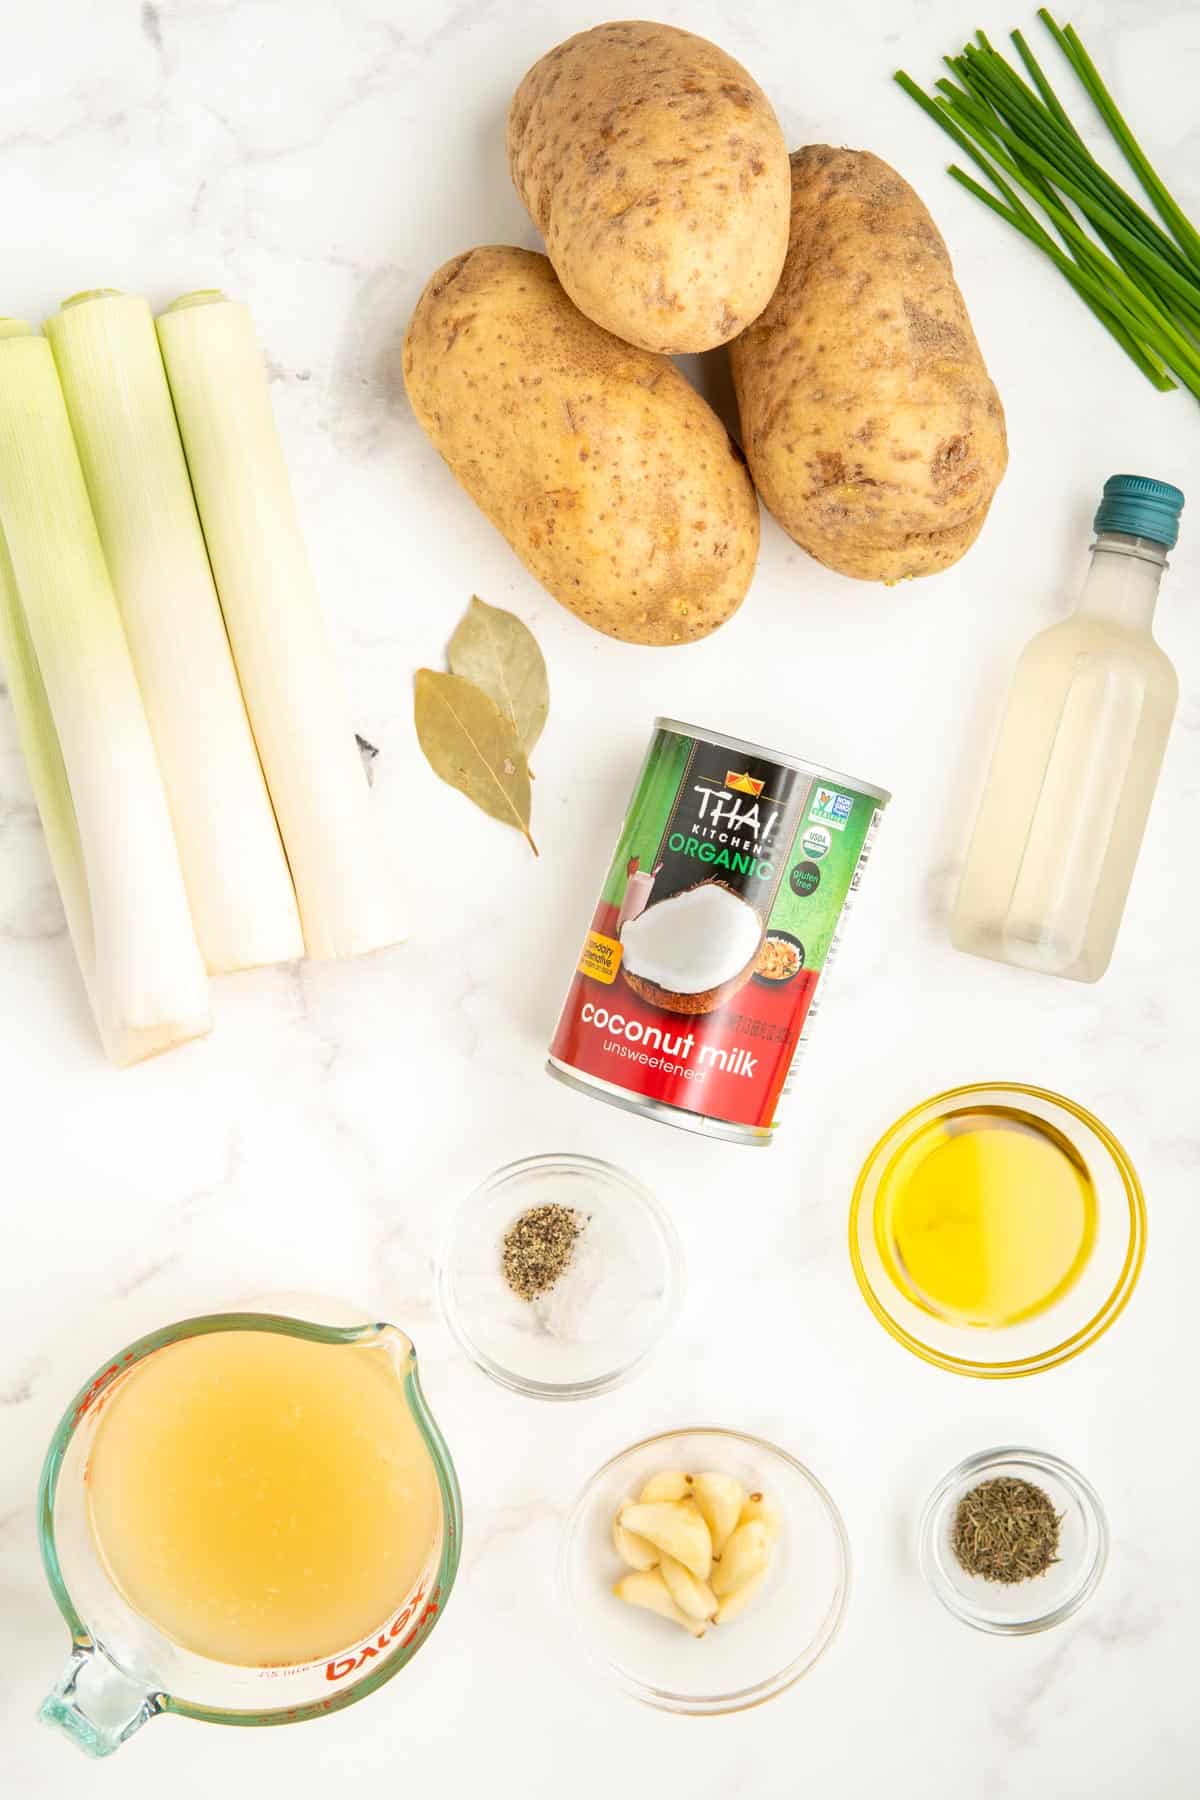 Ingredients needed to make vegan potato and leek soup without cream.